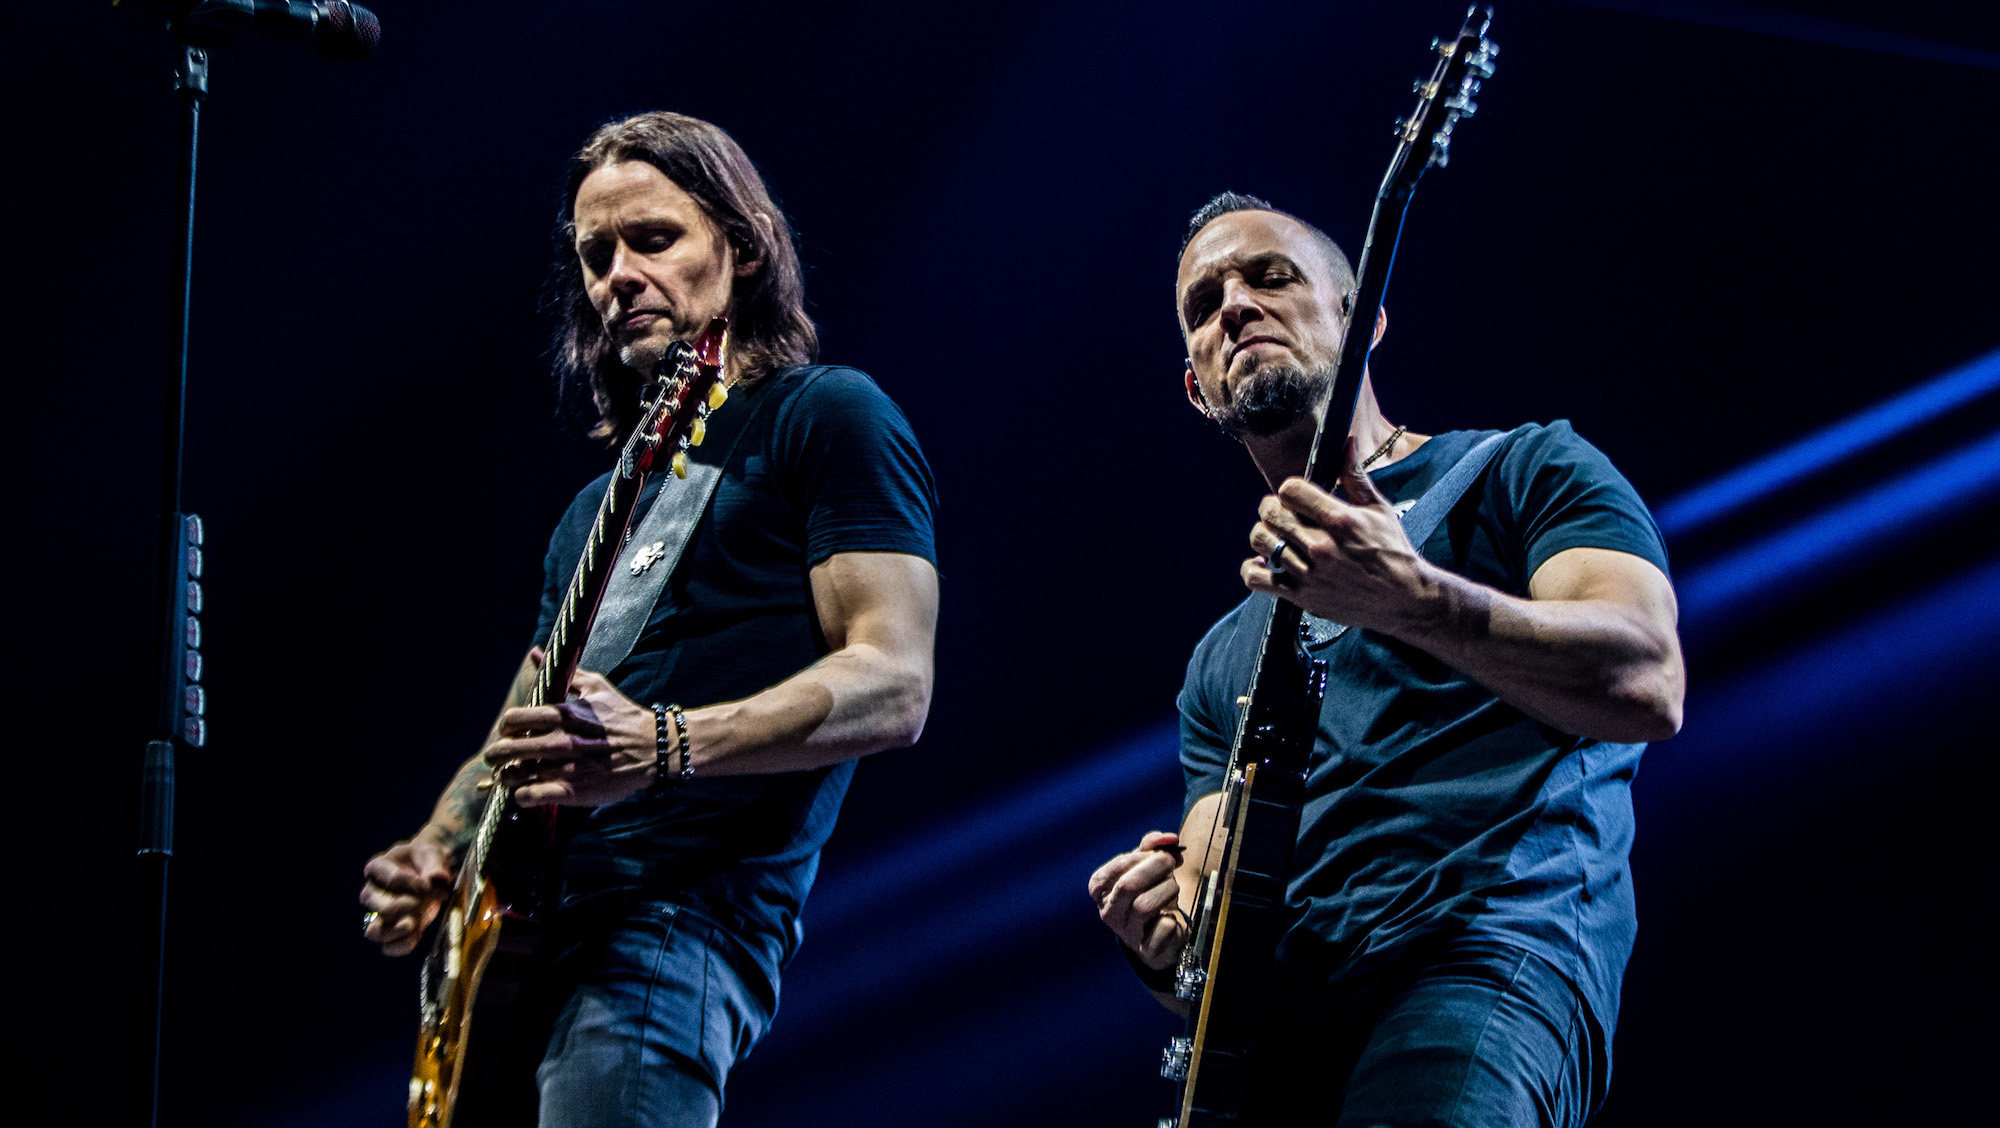 Alter Bridge - Pawns & Kings (Official Video) 